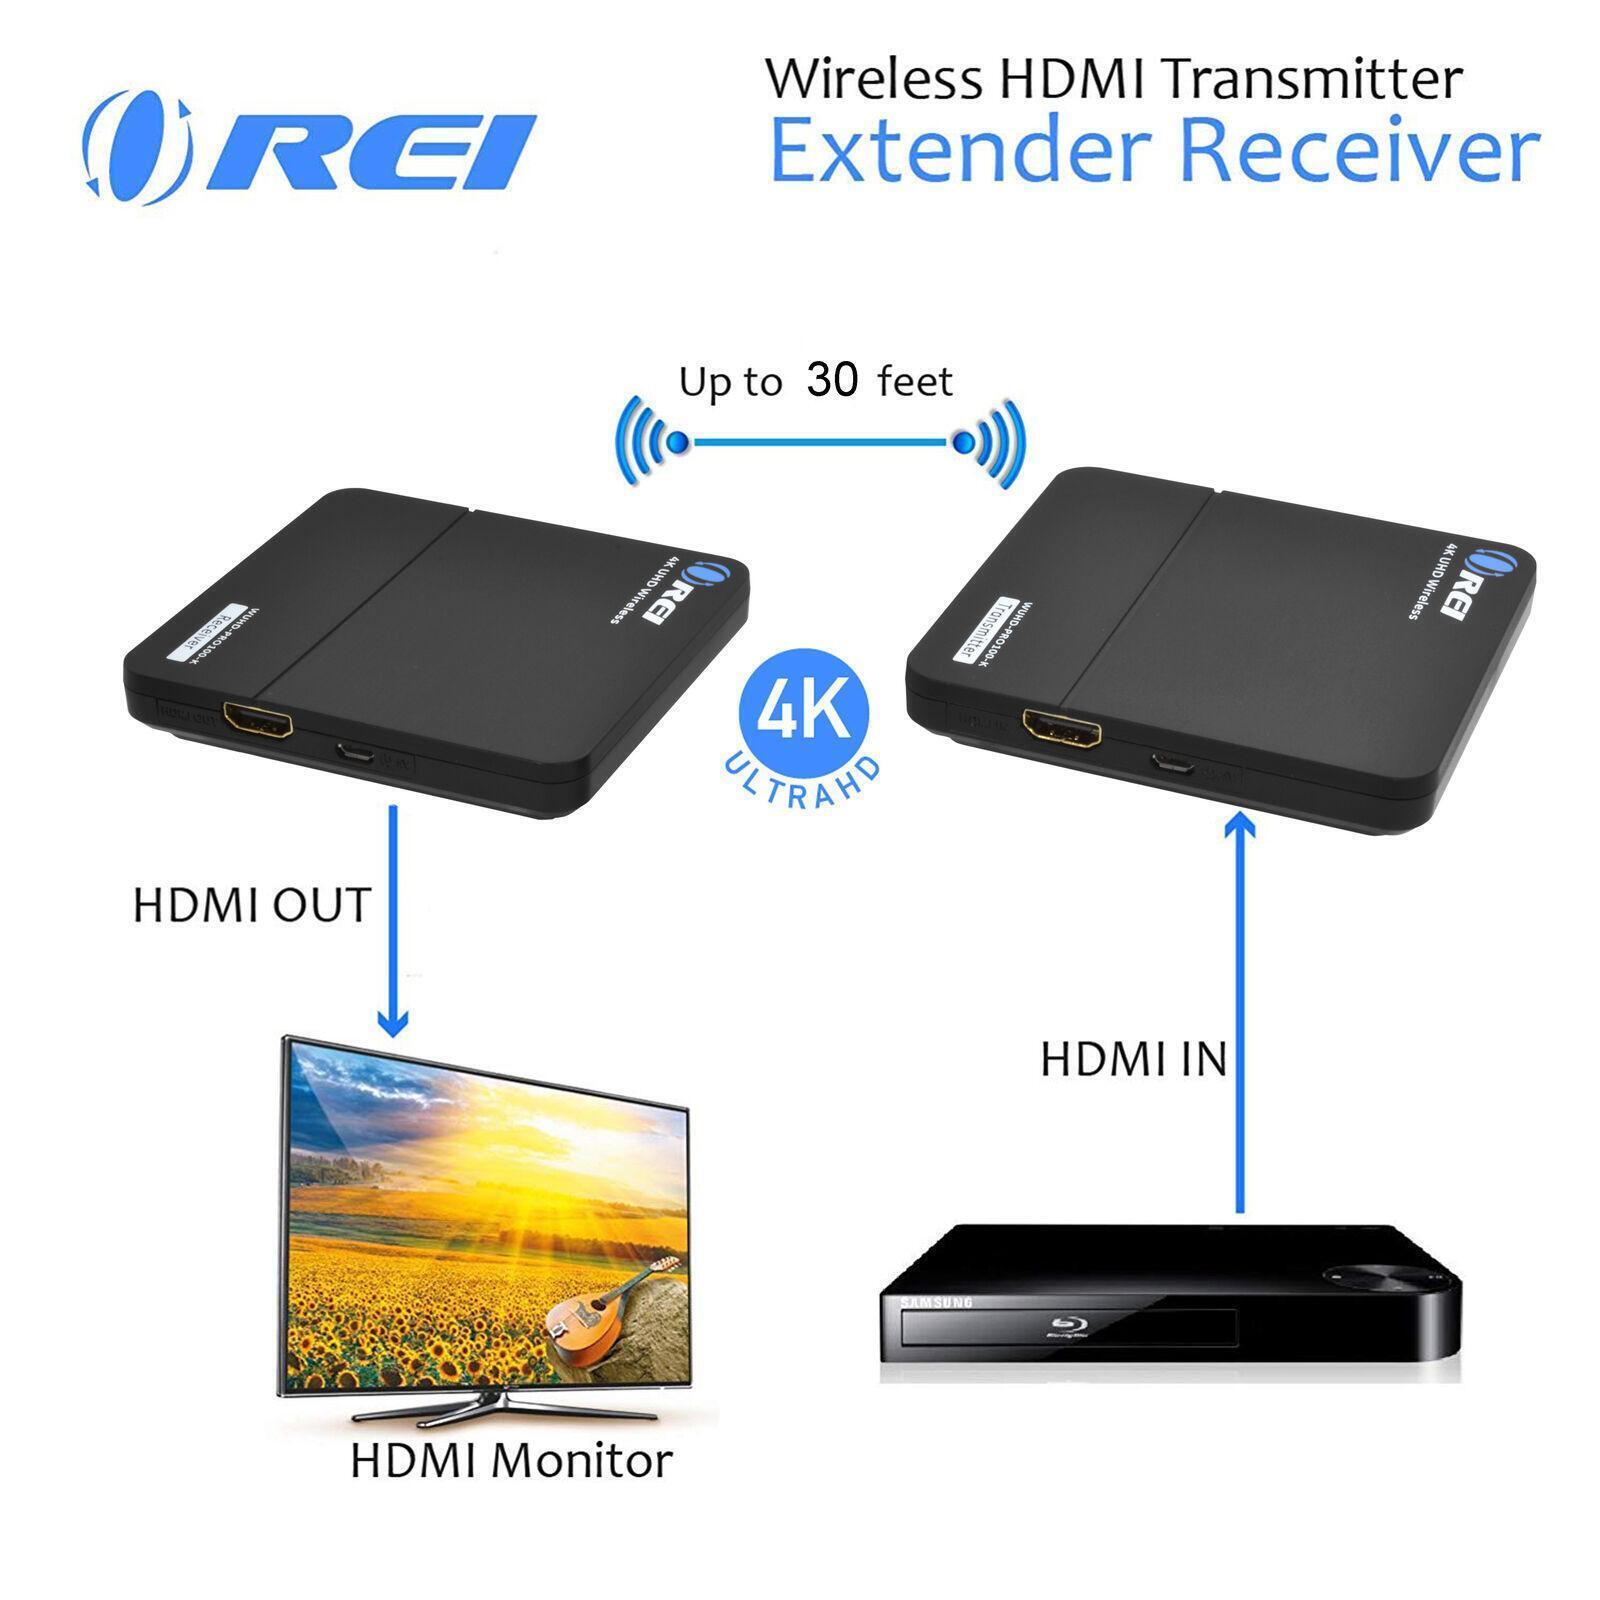 Orei Wireless HDMI Extender Transmitter & Receiver Dongle Up to 4K Upto 30 Feet